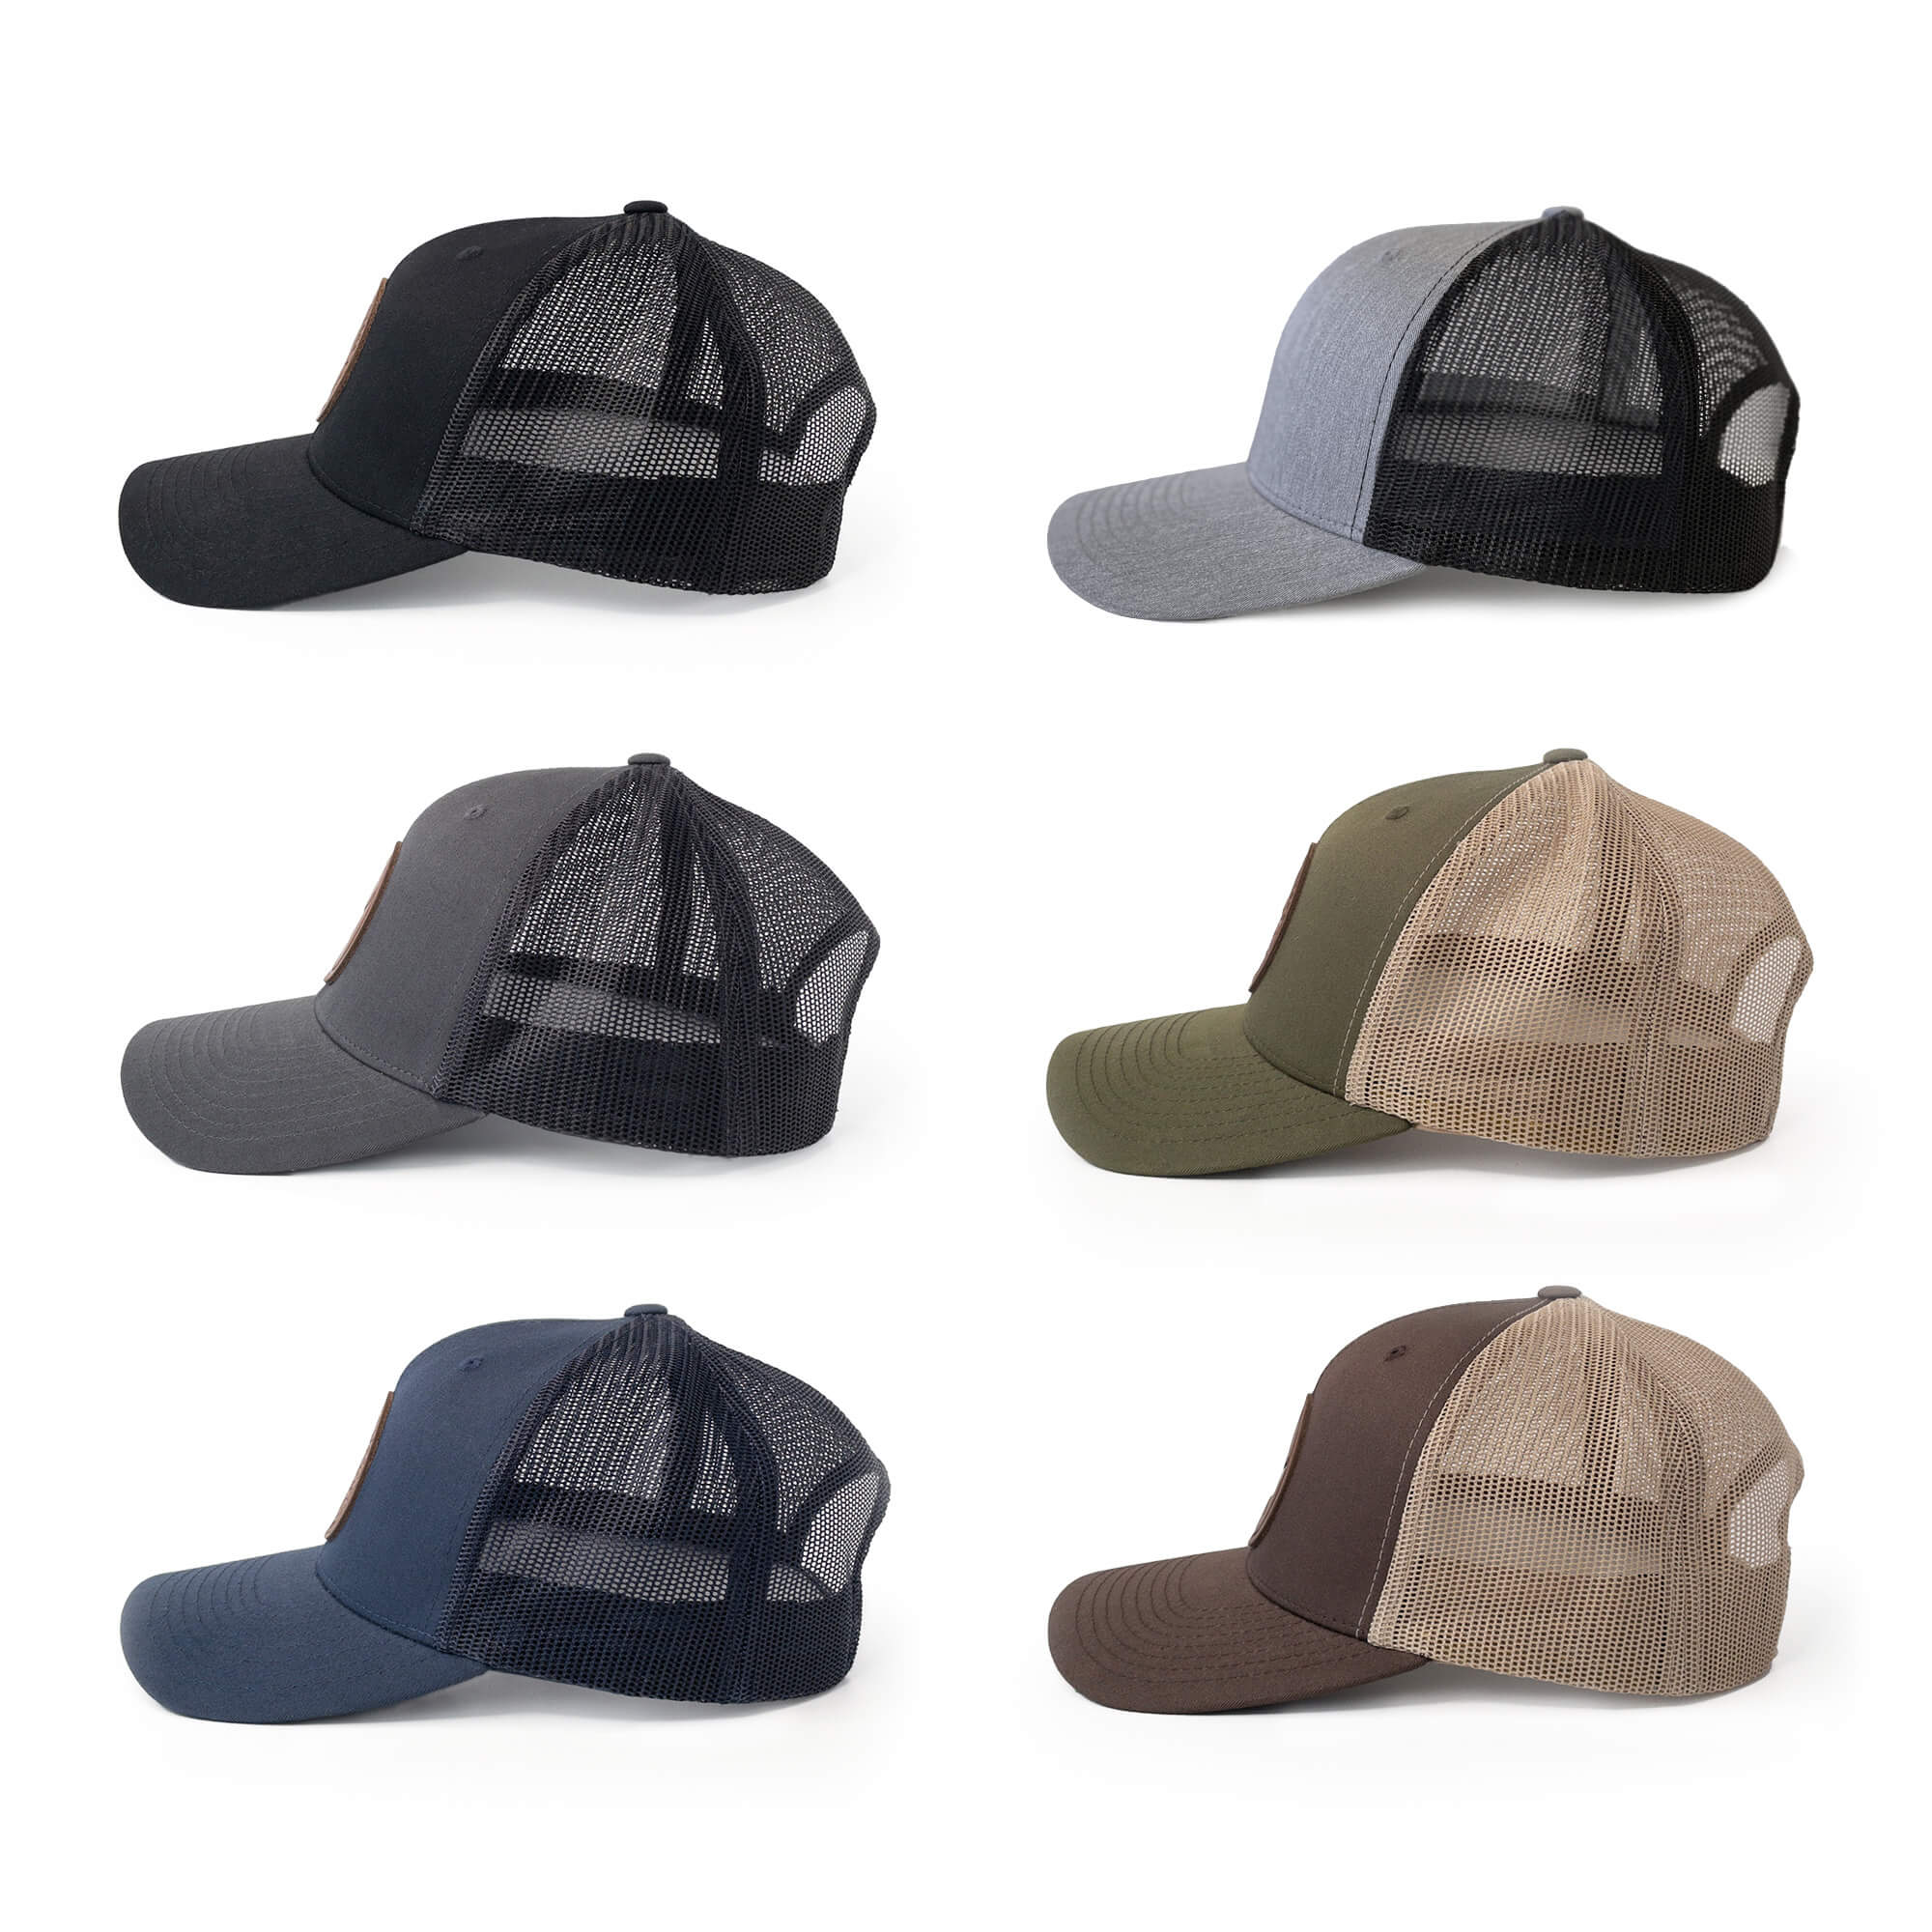 Leather patch trucker hats available in 6 colors | BLACK-003-008, CHARC-003-008, NAVY-003-008, HGREY-003-008, MOSS-003-008, BROWN-003-008